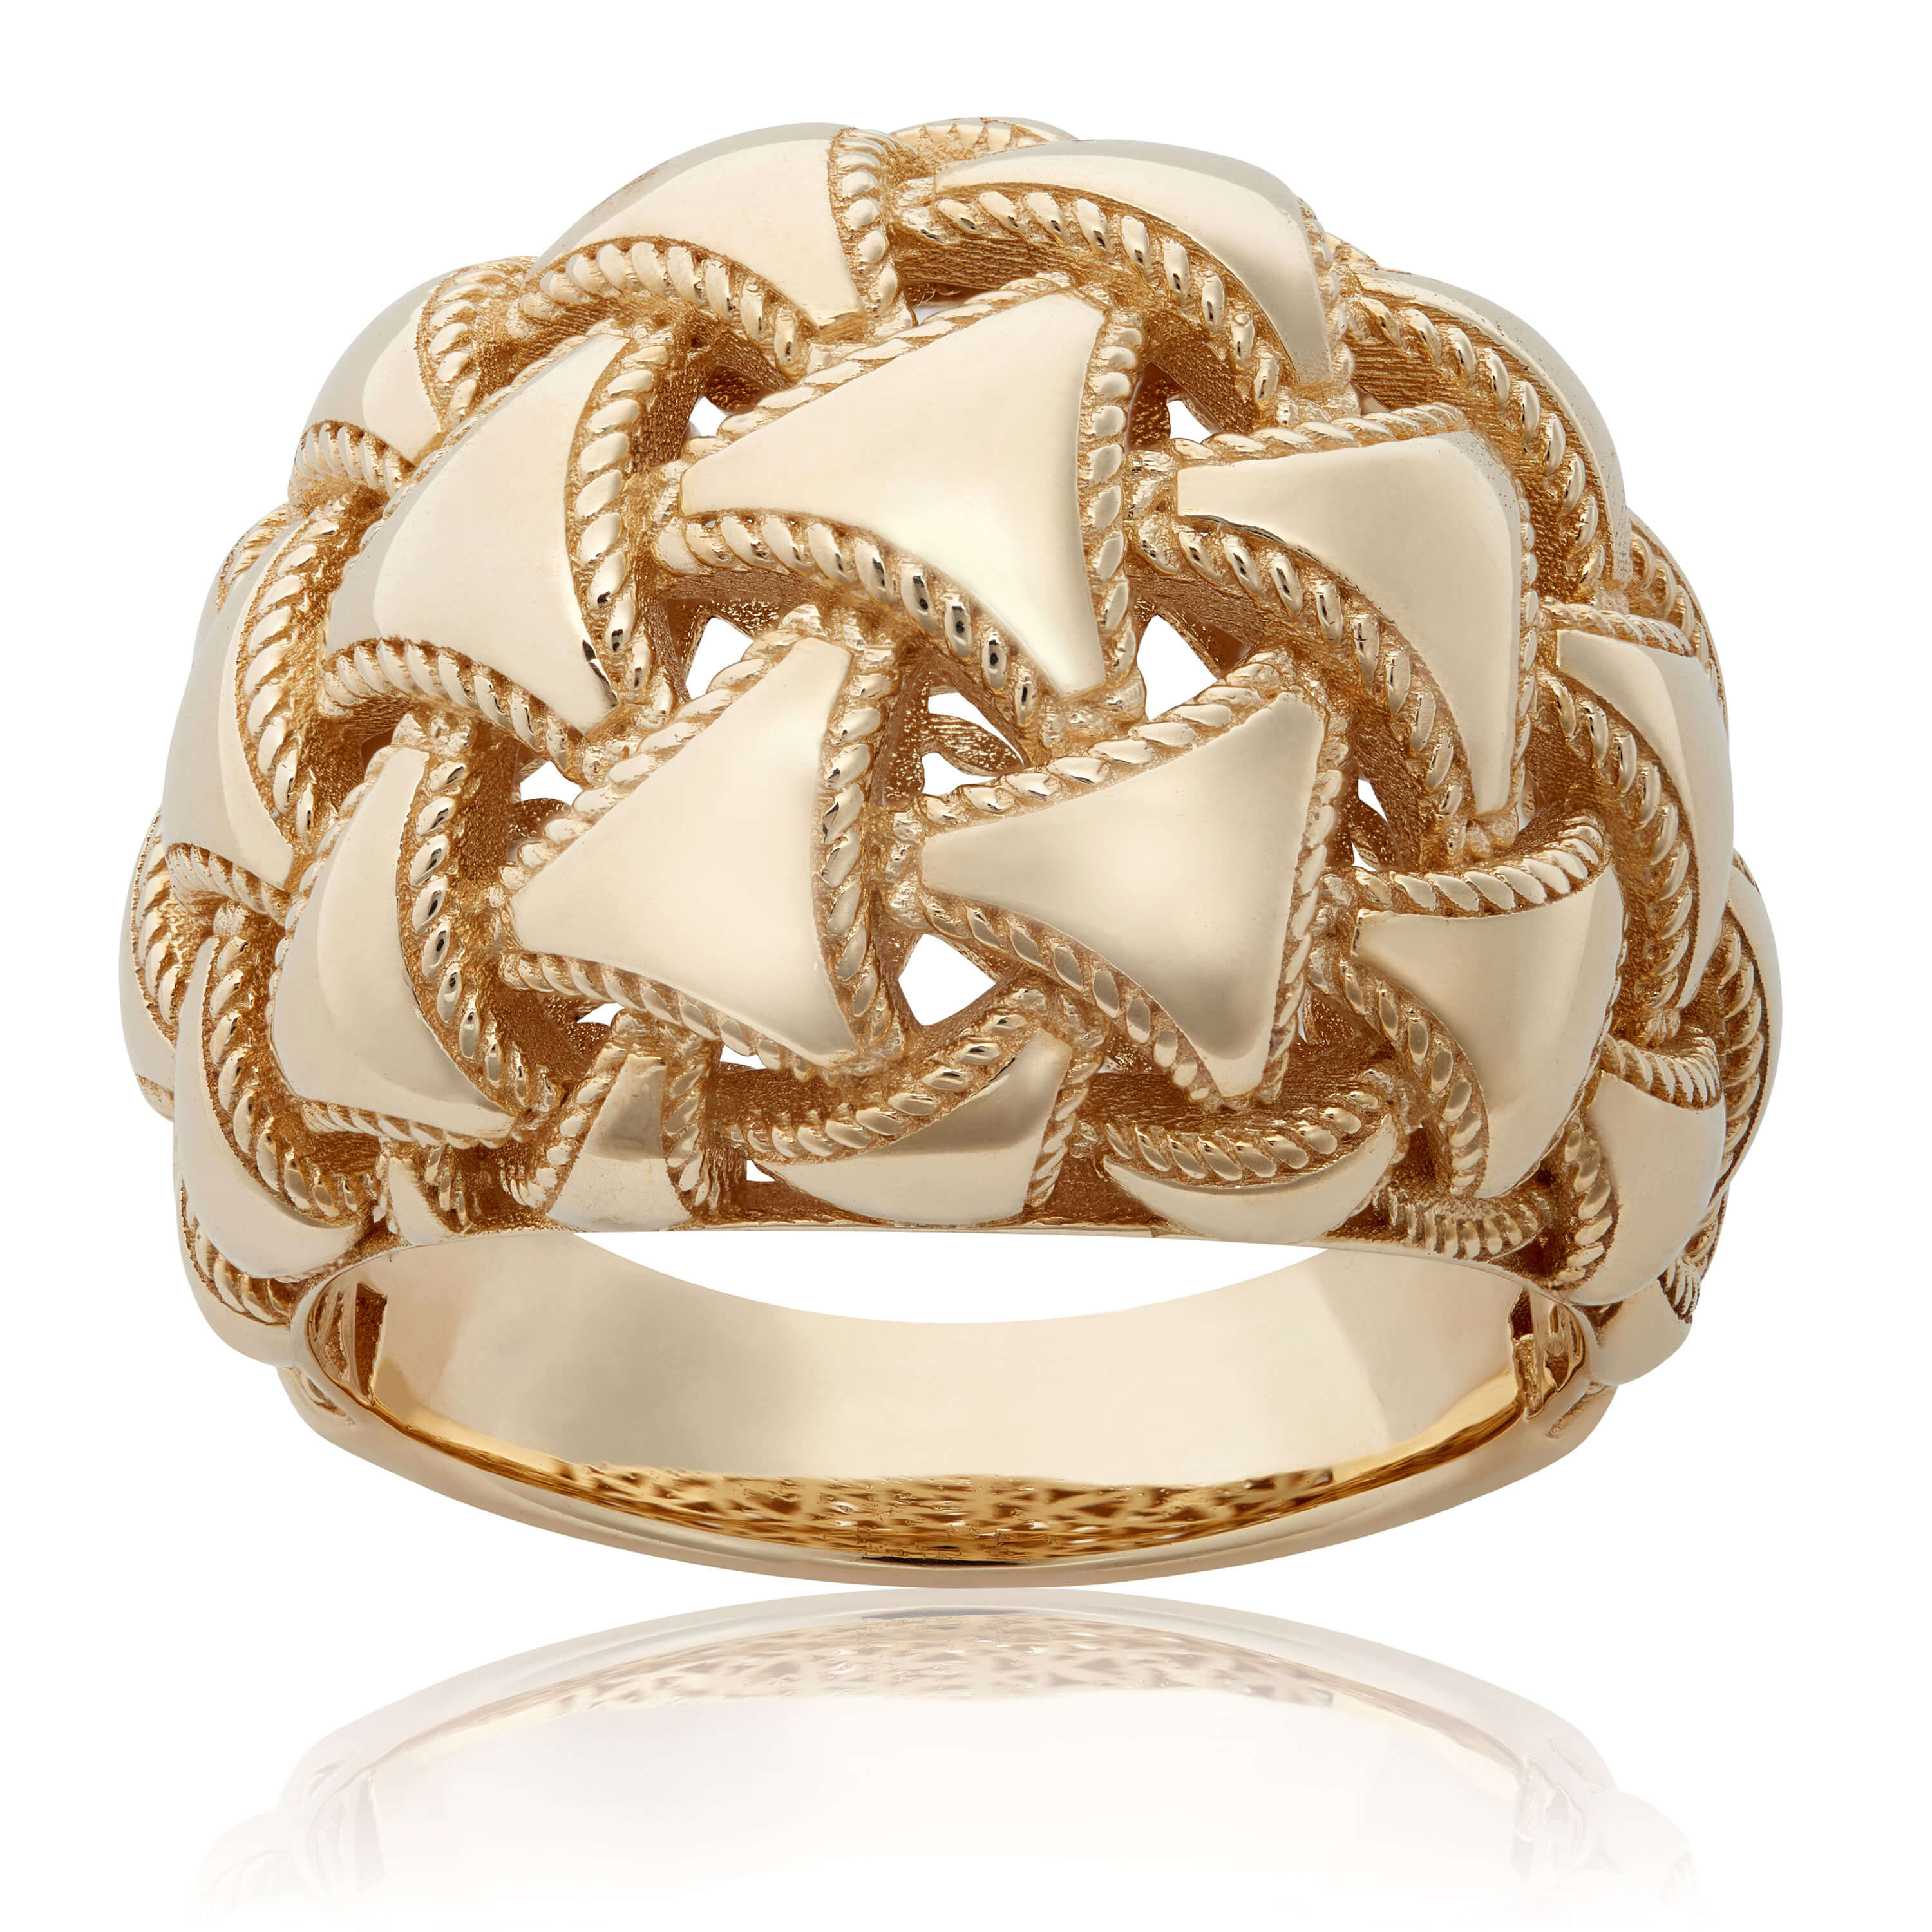 Toscano Woven Domed Ring 14K, Size 6